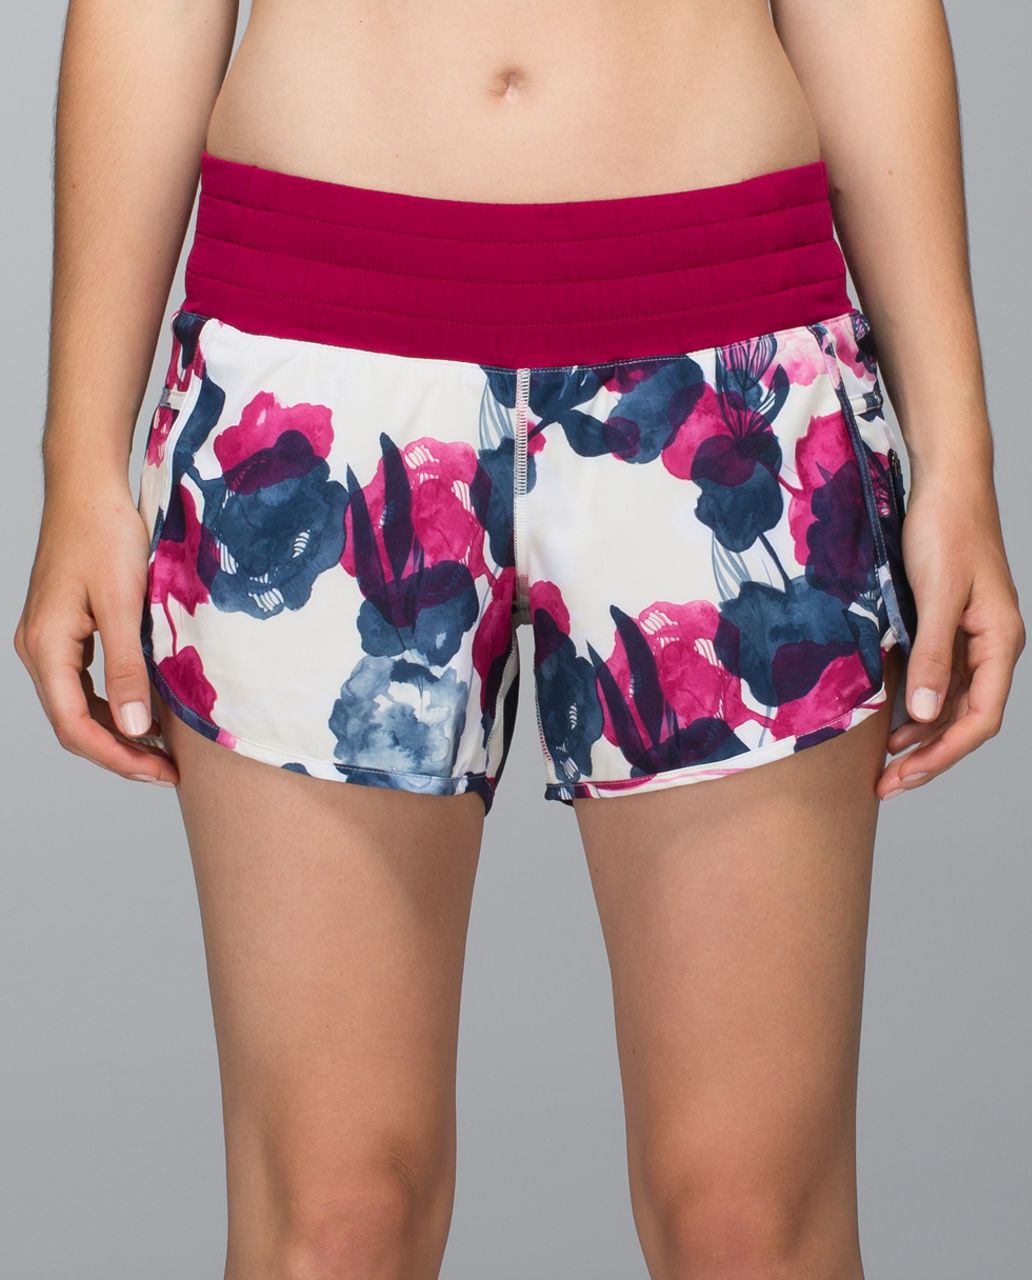 Lululemon Tracker Short II *4-way Stretch - Inky Floral Ghost Inkwell Bumble Berry / Bumble Berry